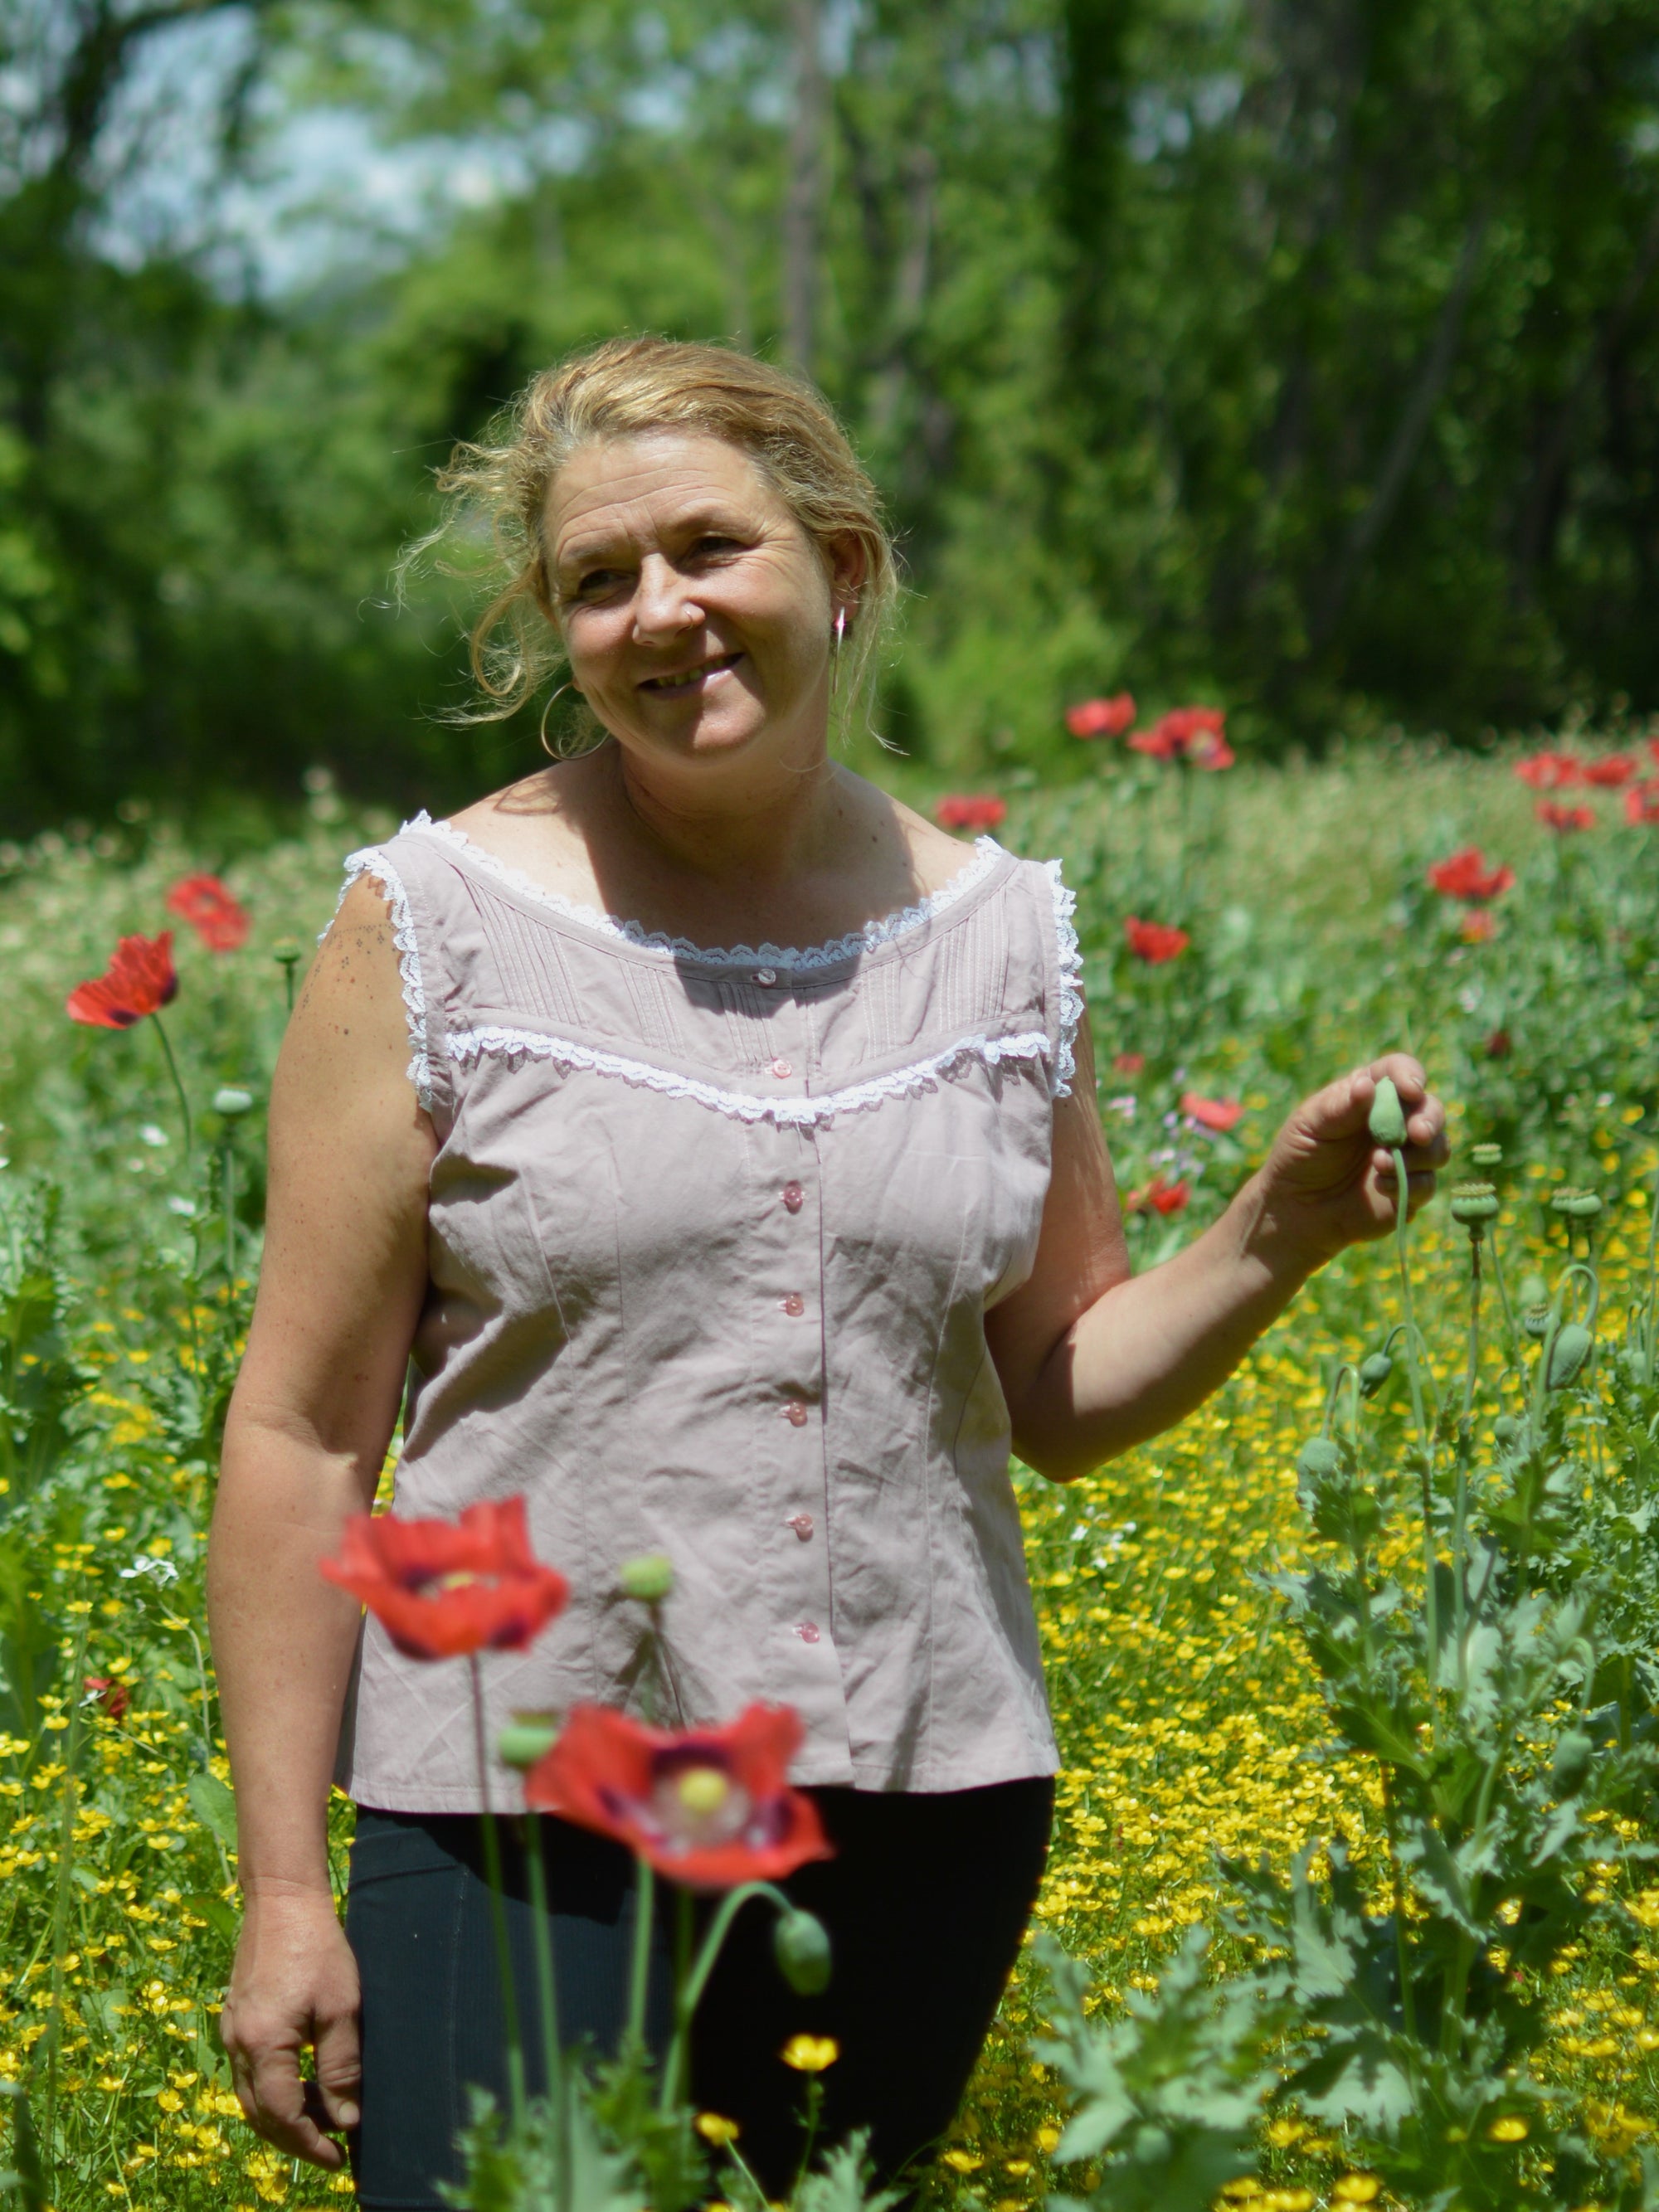 smiling middle aged white, blonde woman standing with left hand on a poppy bud wearing sleeveless camisole in pale pink with white ruffle lace and black athletic leggings she is standing in a field of red poppies.